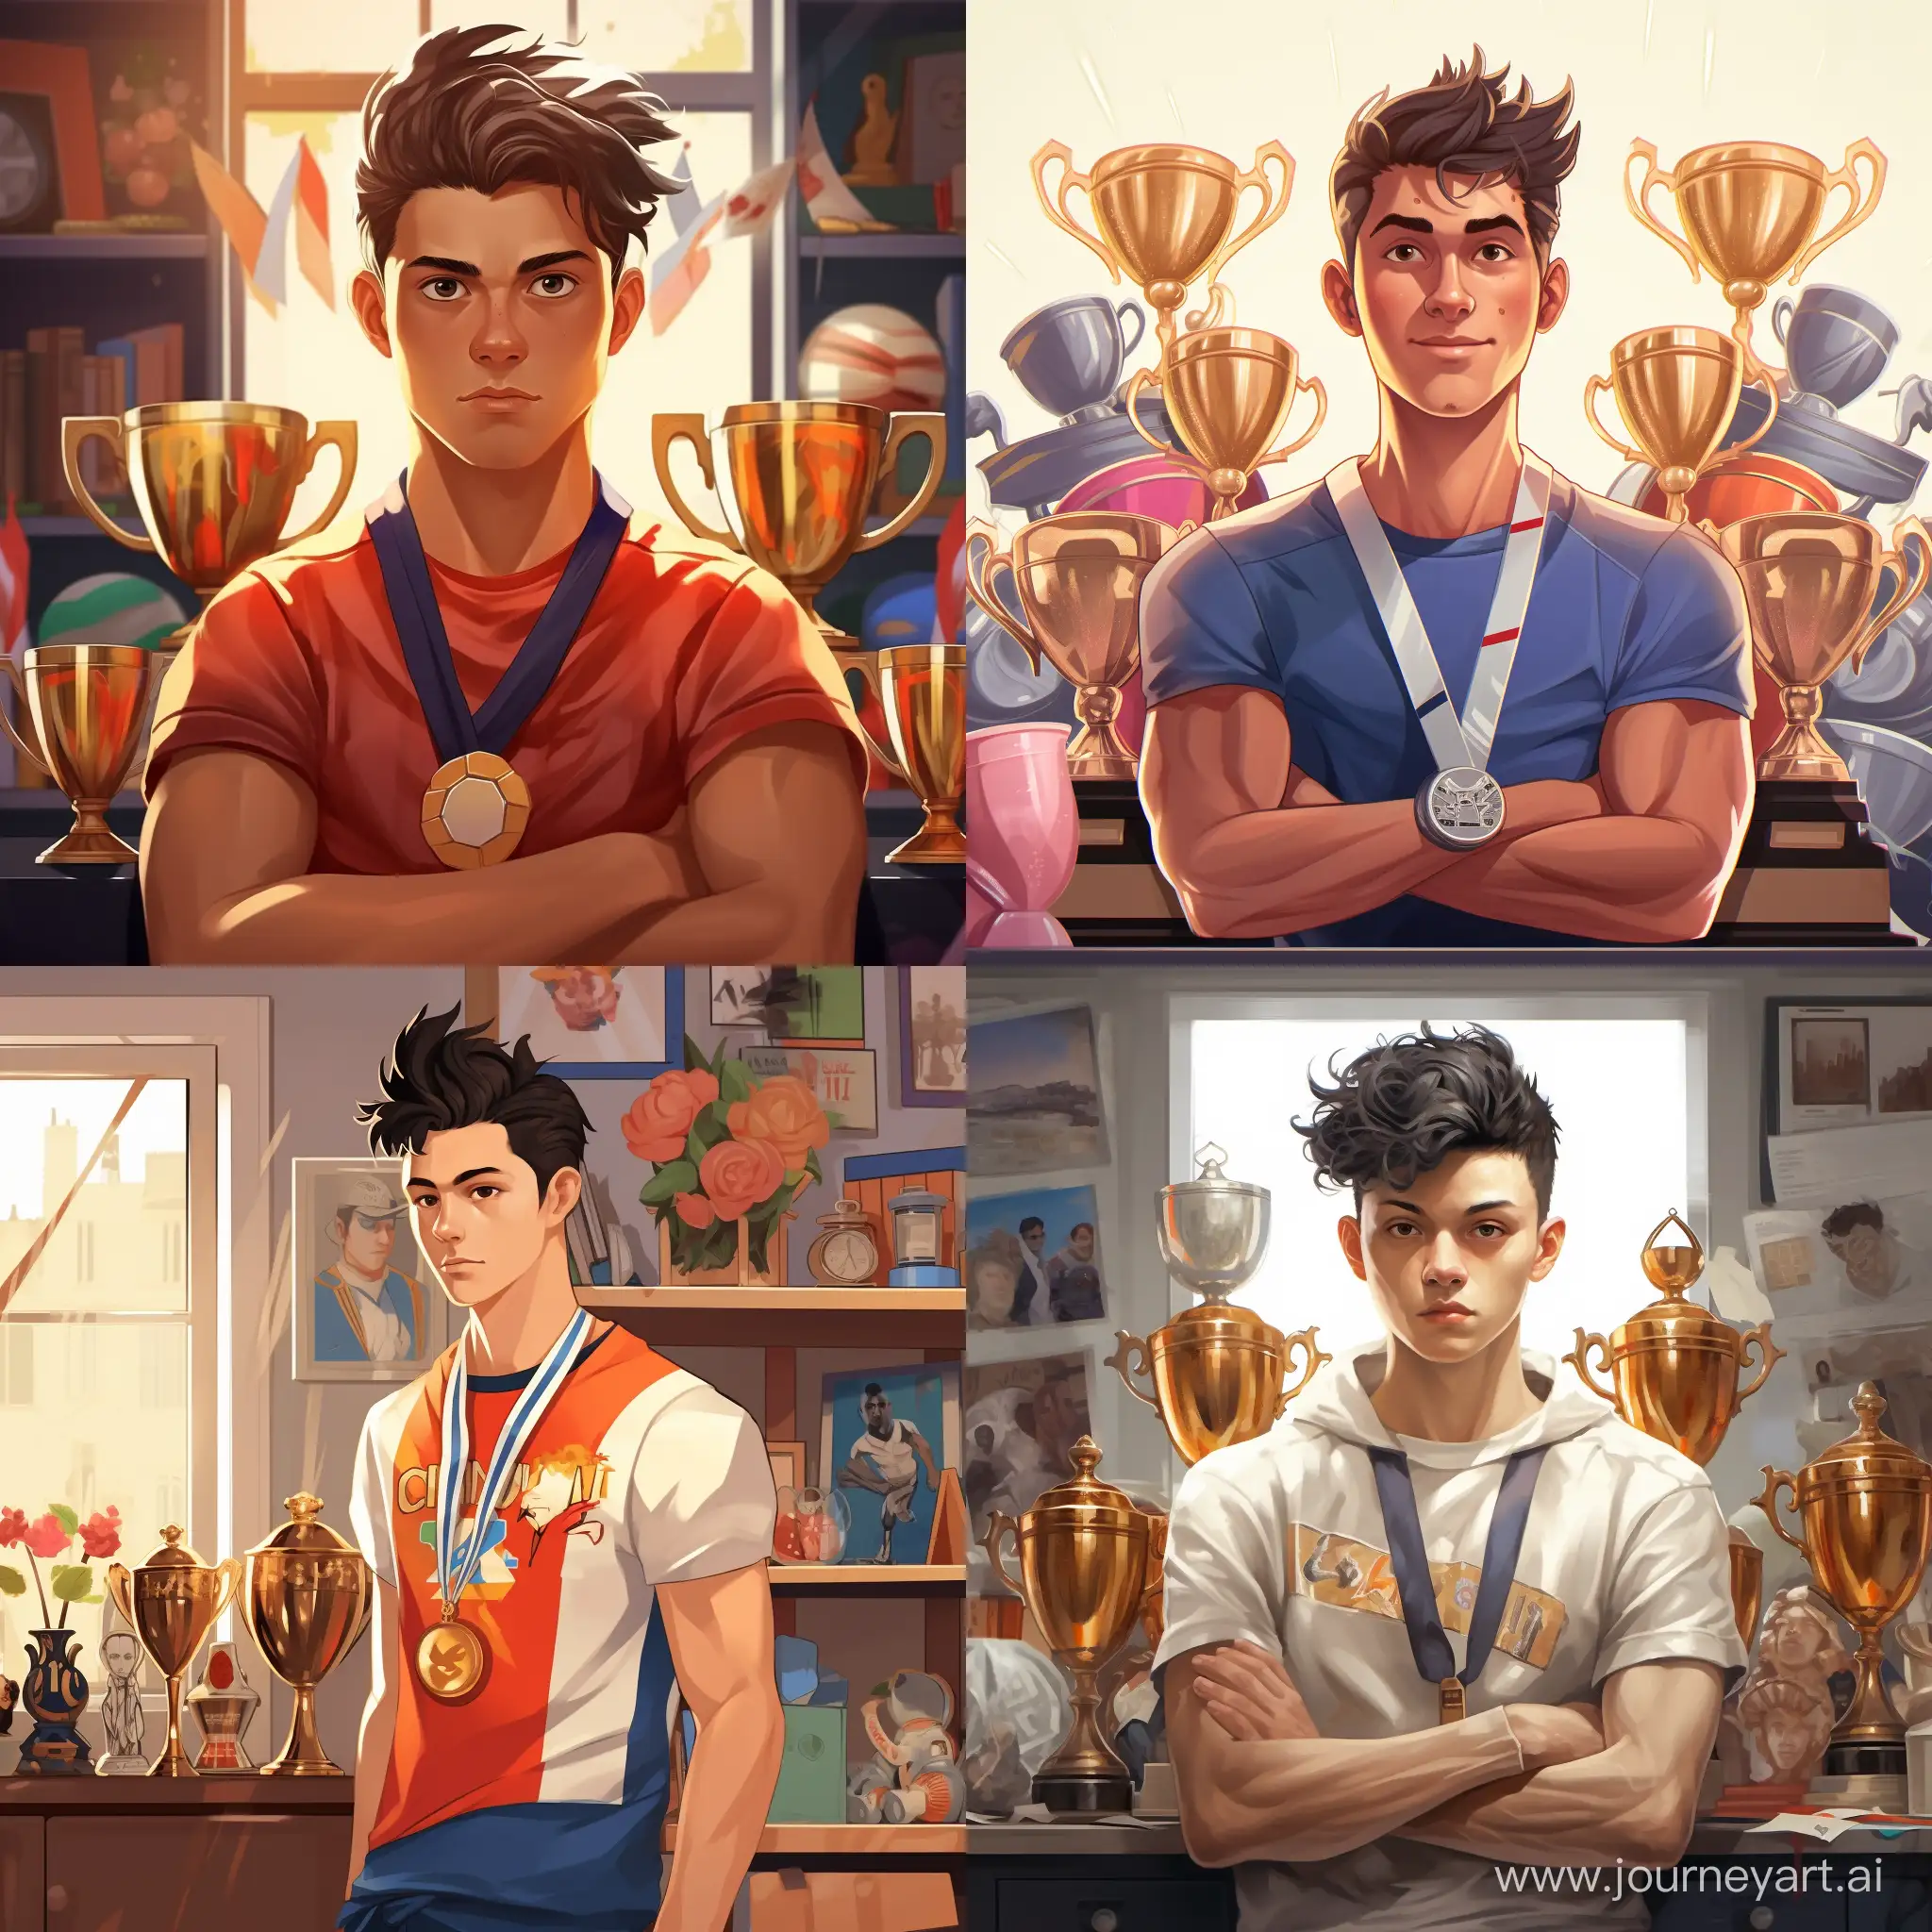 Focused-Athlete-with-Medals-and-Cups-Short-Hairstyle-and-Dark-Hair